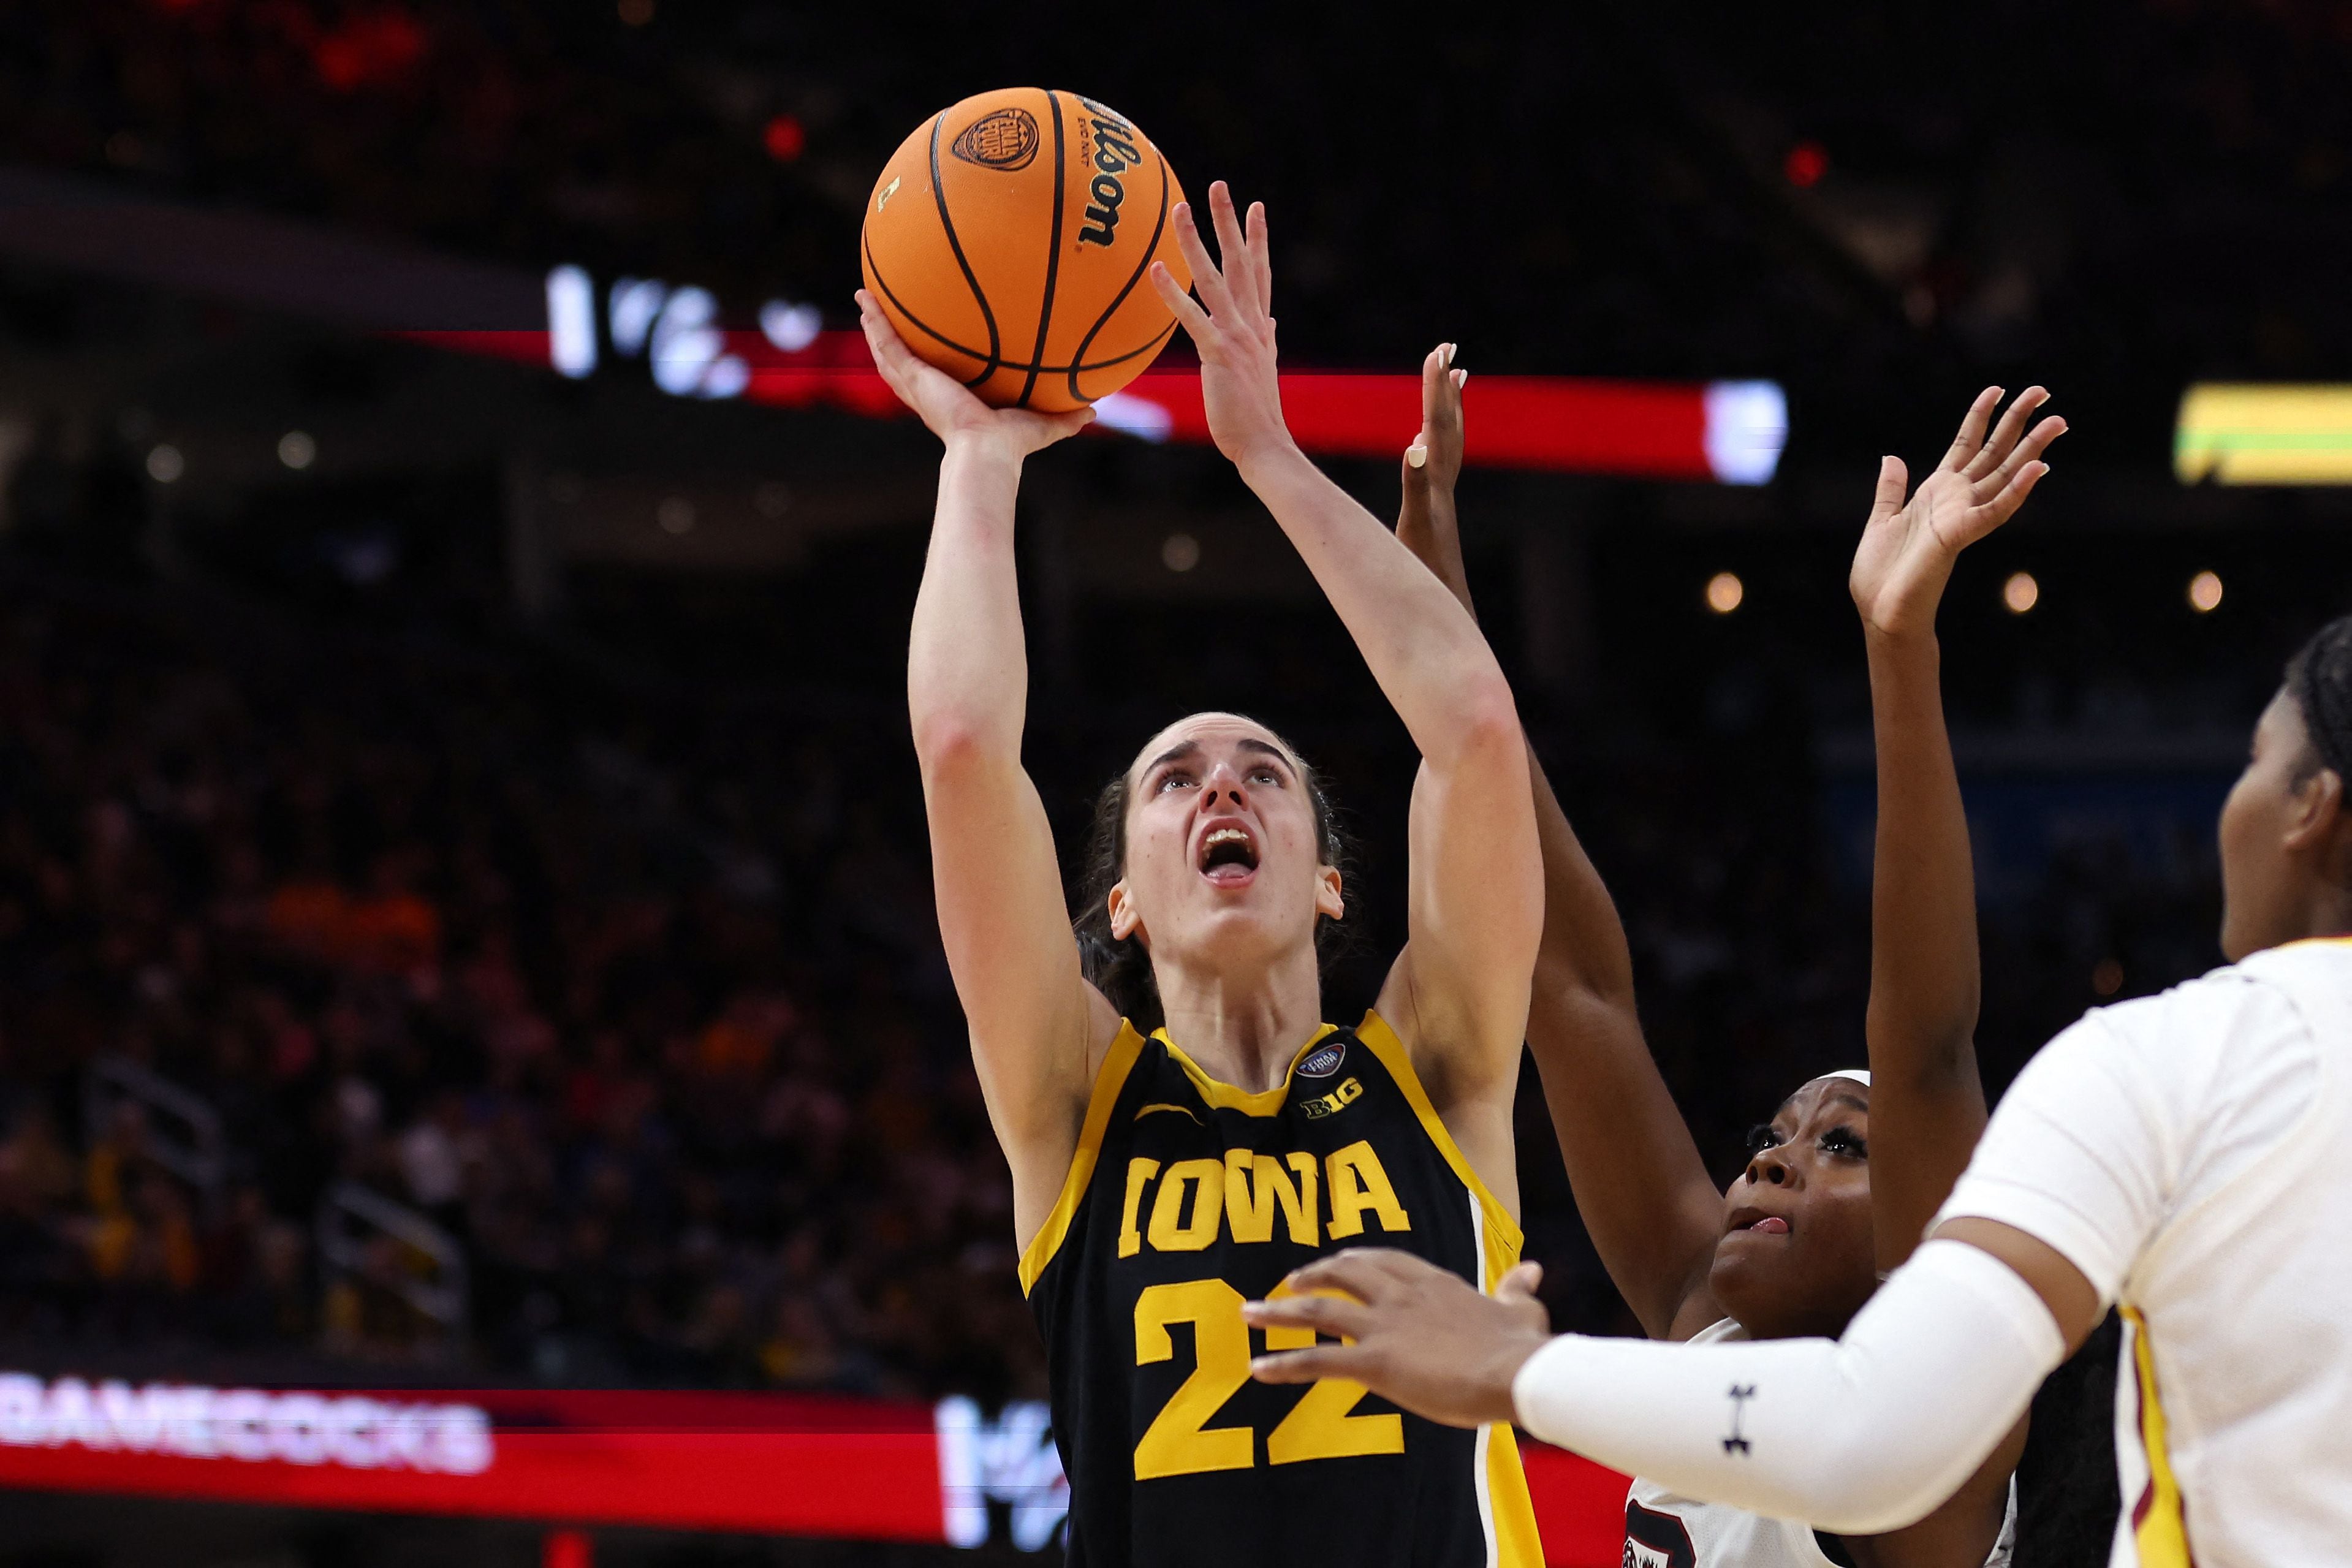 CLEVELAND, OHIO - APRIL 07: Caitlin Clark #22 of the Iowa Hawkeyes shoots the ball over Raven Johnson #25 of the South Carolina Gamecocks in the second half during the 2024 NCAA Women's Basketball Tournament National Championship at Rocket Mortgage FieldHouse on April 07, 2024 in Cleveland, Ohio.   Steph Chambers/Getty Images/AFP (Photo by Steph Chambers / GETTY IMAGES NORTH AMERICA / Getty Images via AFP)